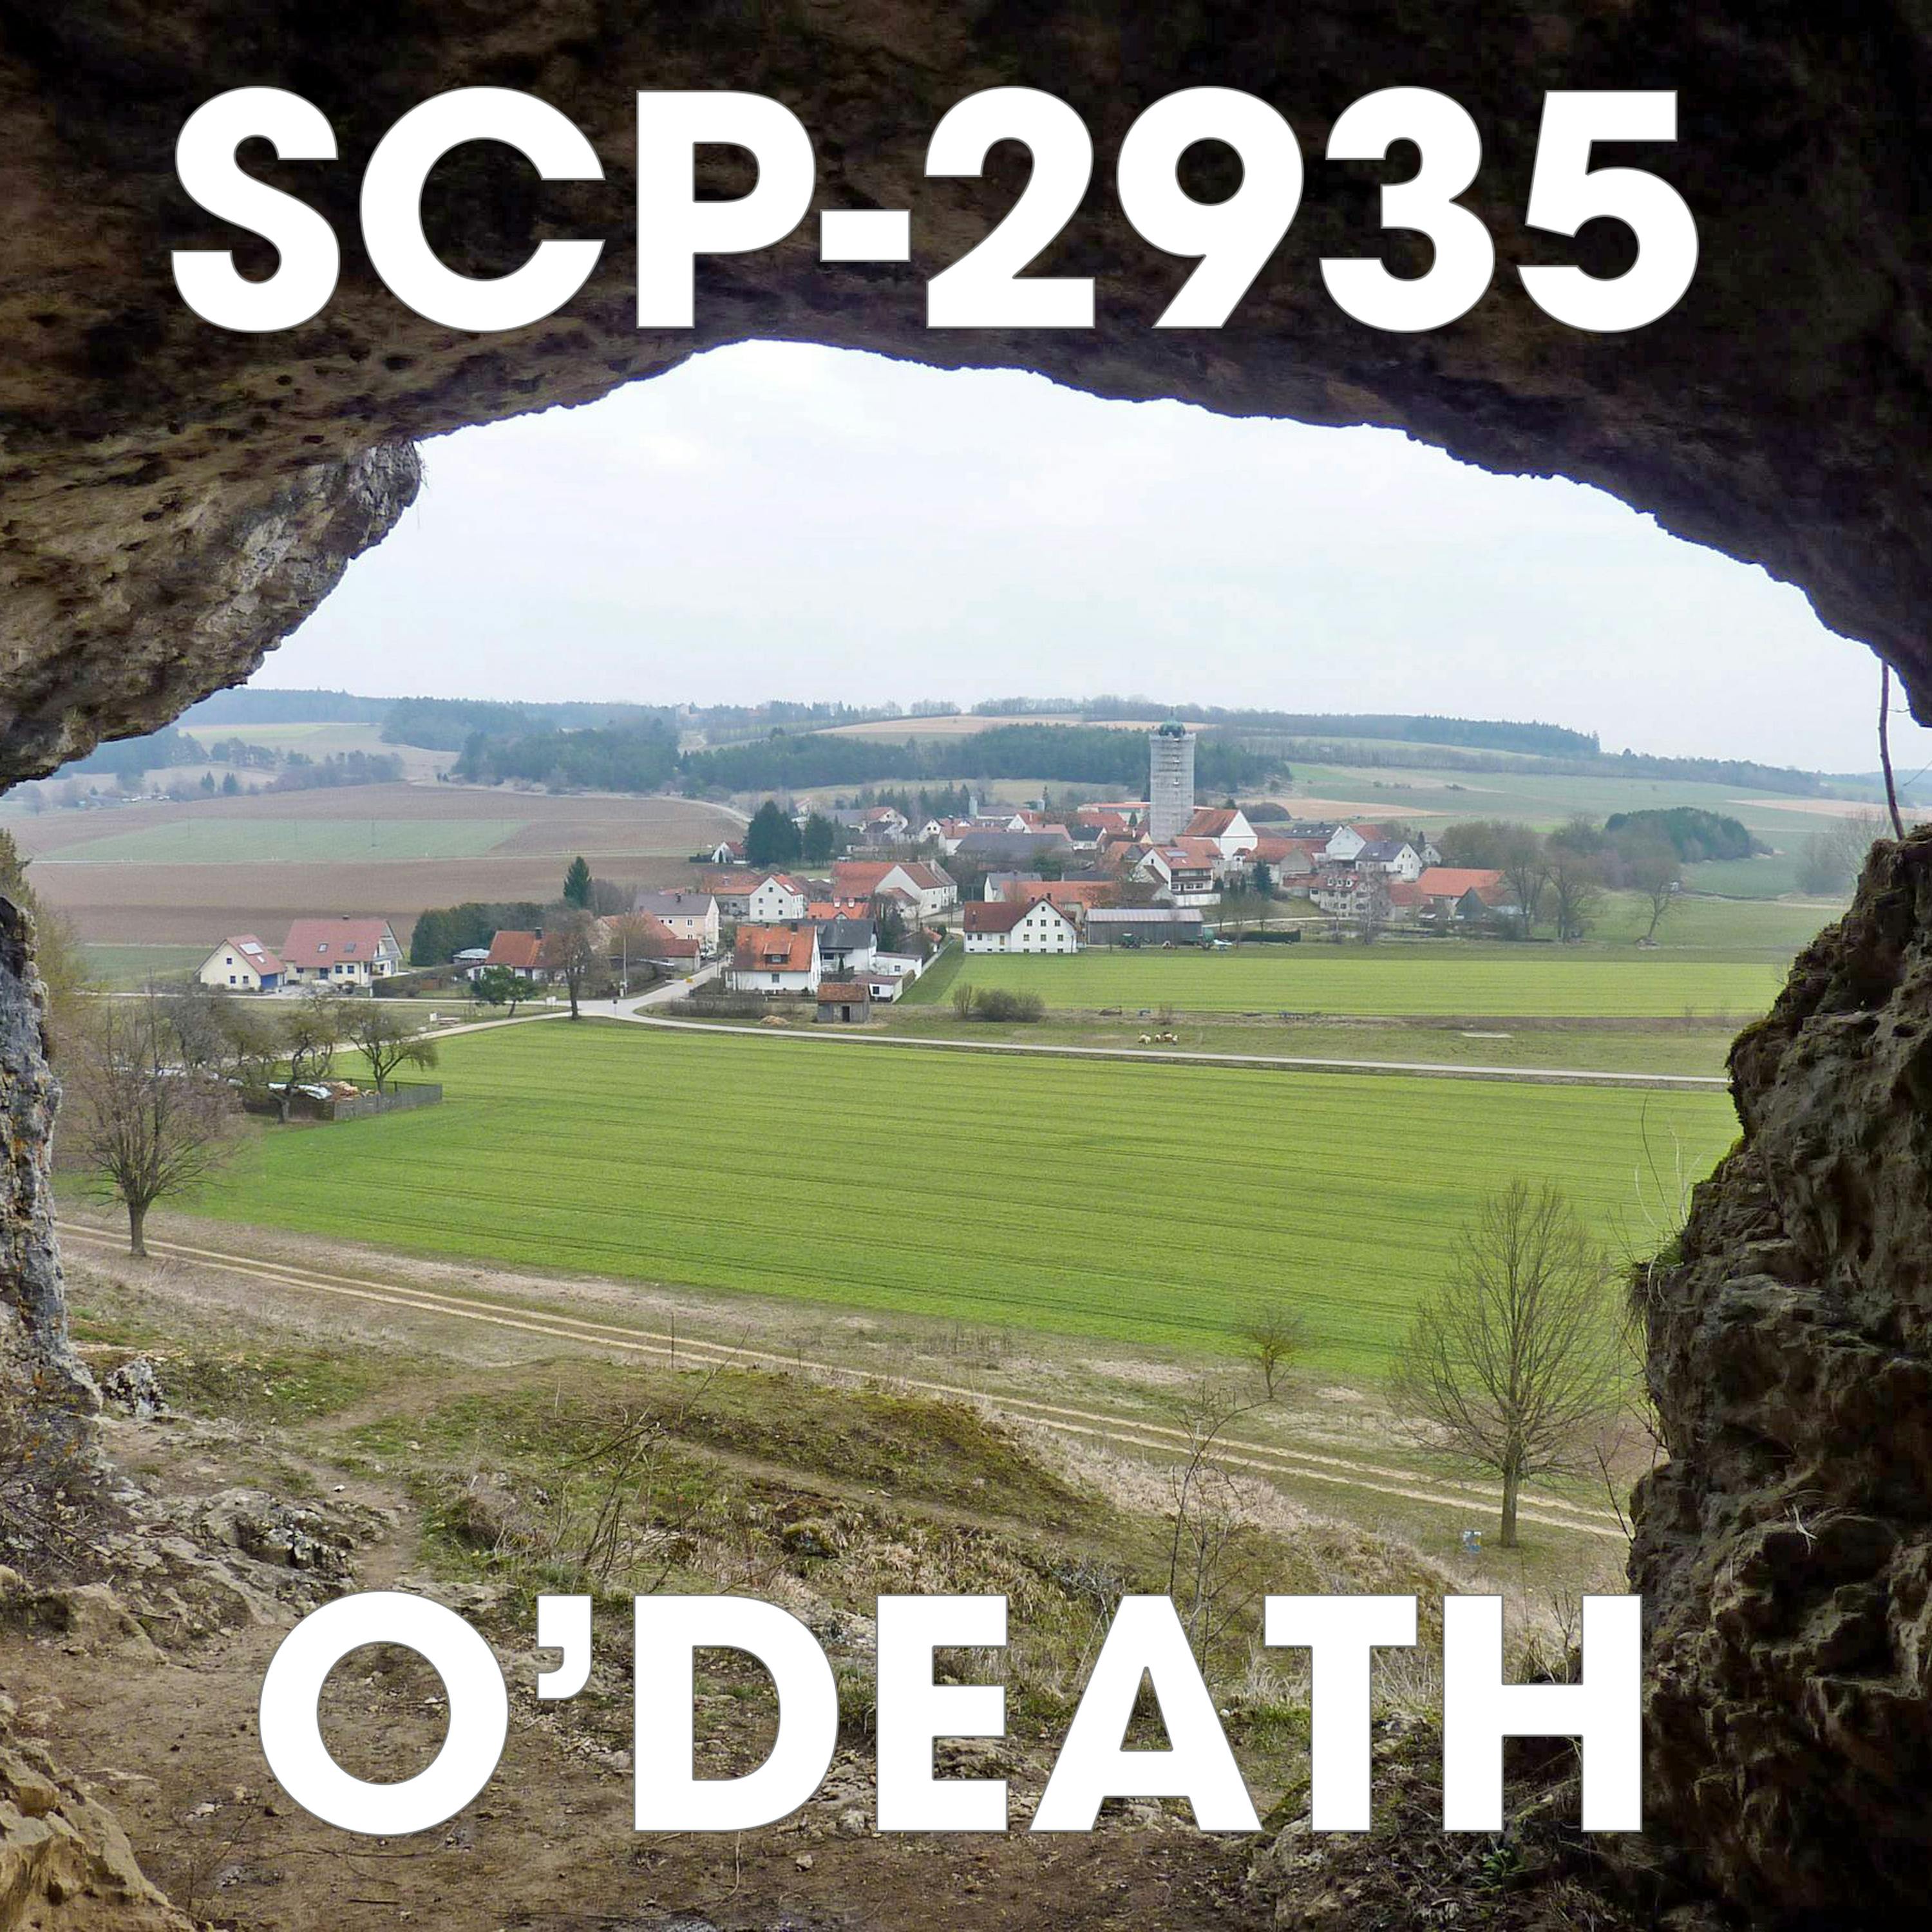 On This Episode of Haunt Patrol, SCP-2733, Podcast